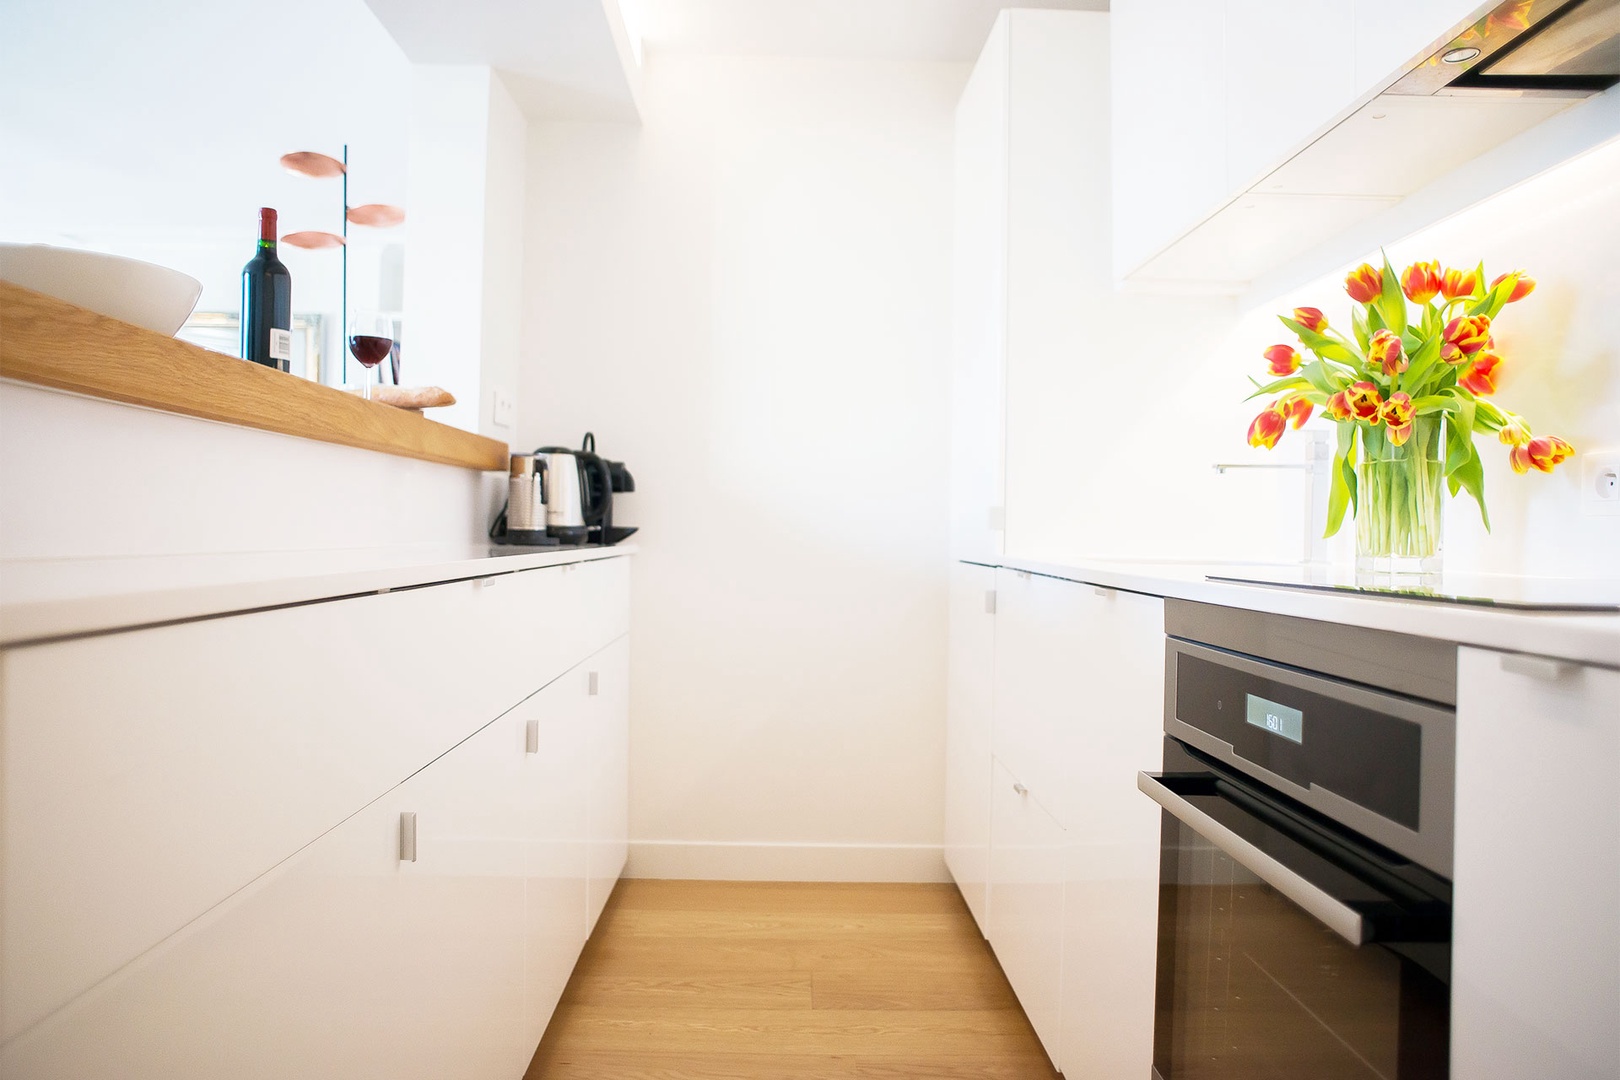 Enjoy cooking in the fully equipped modern kitchen.